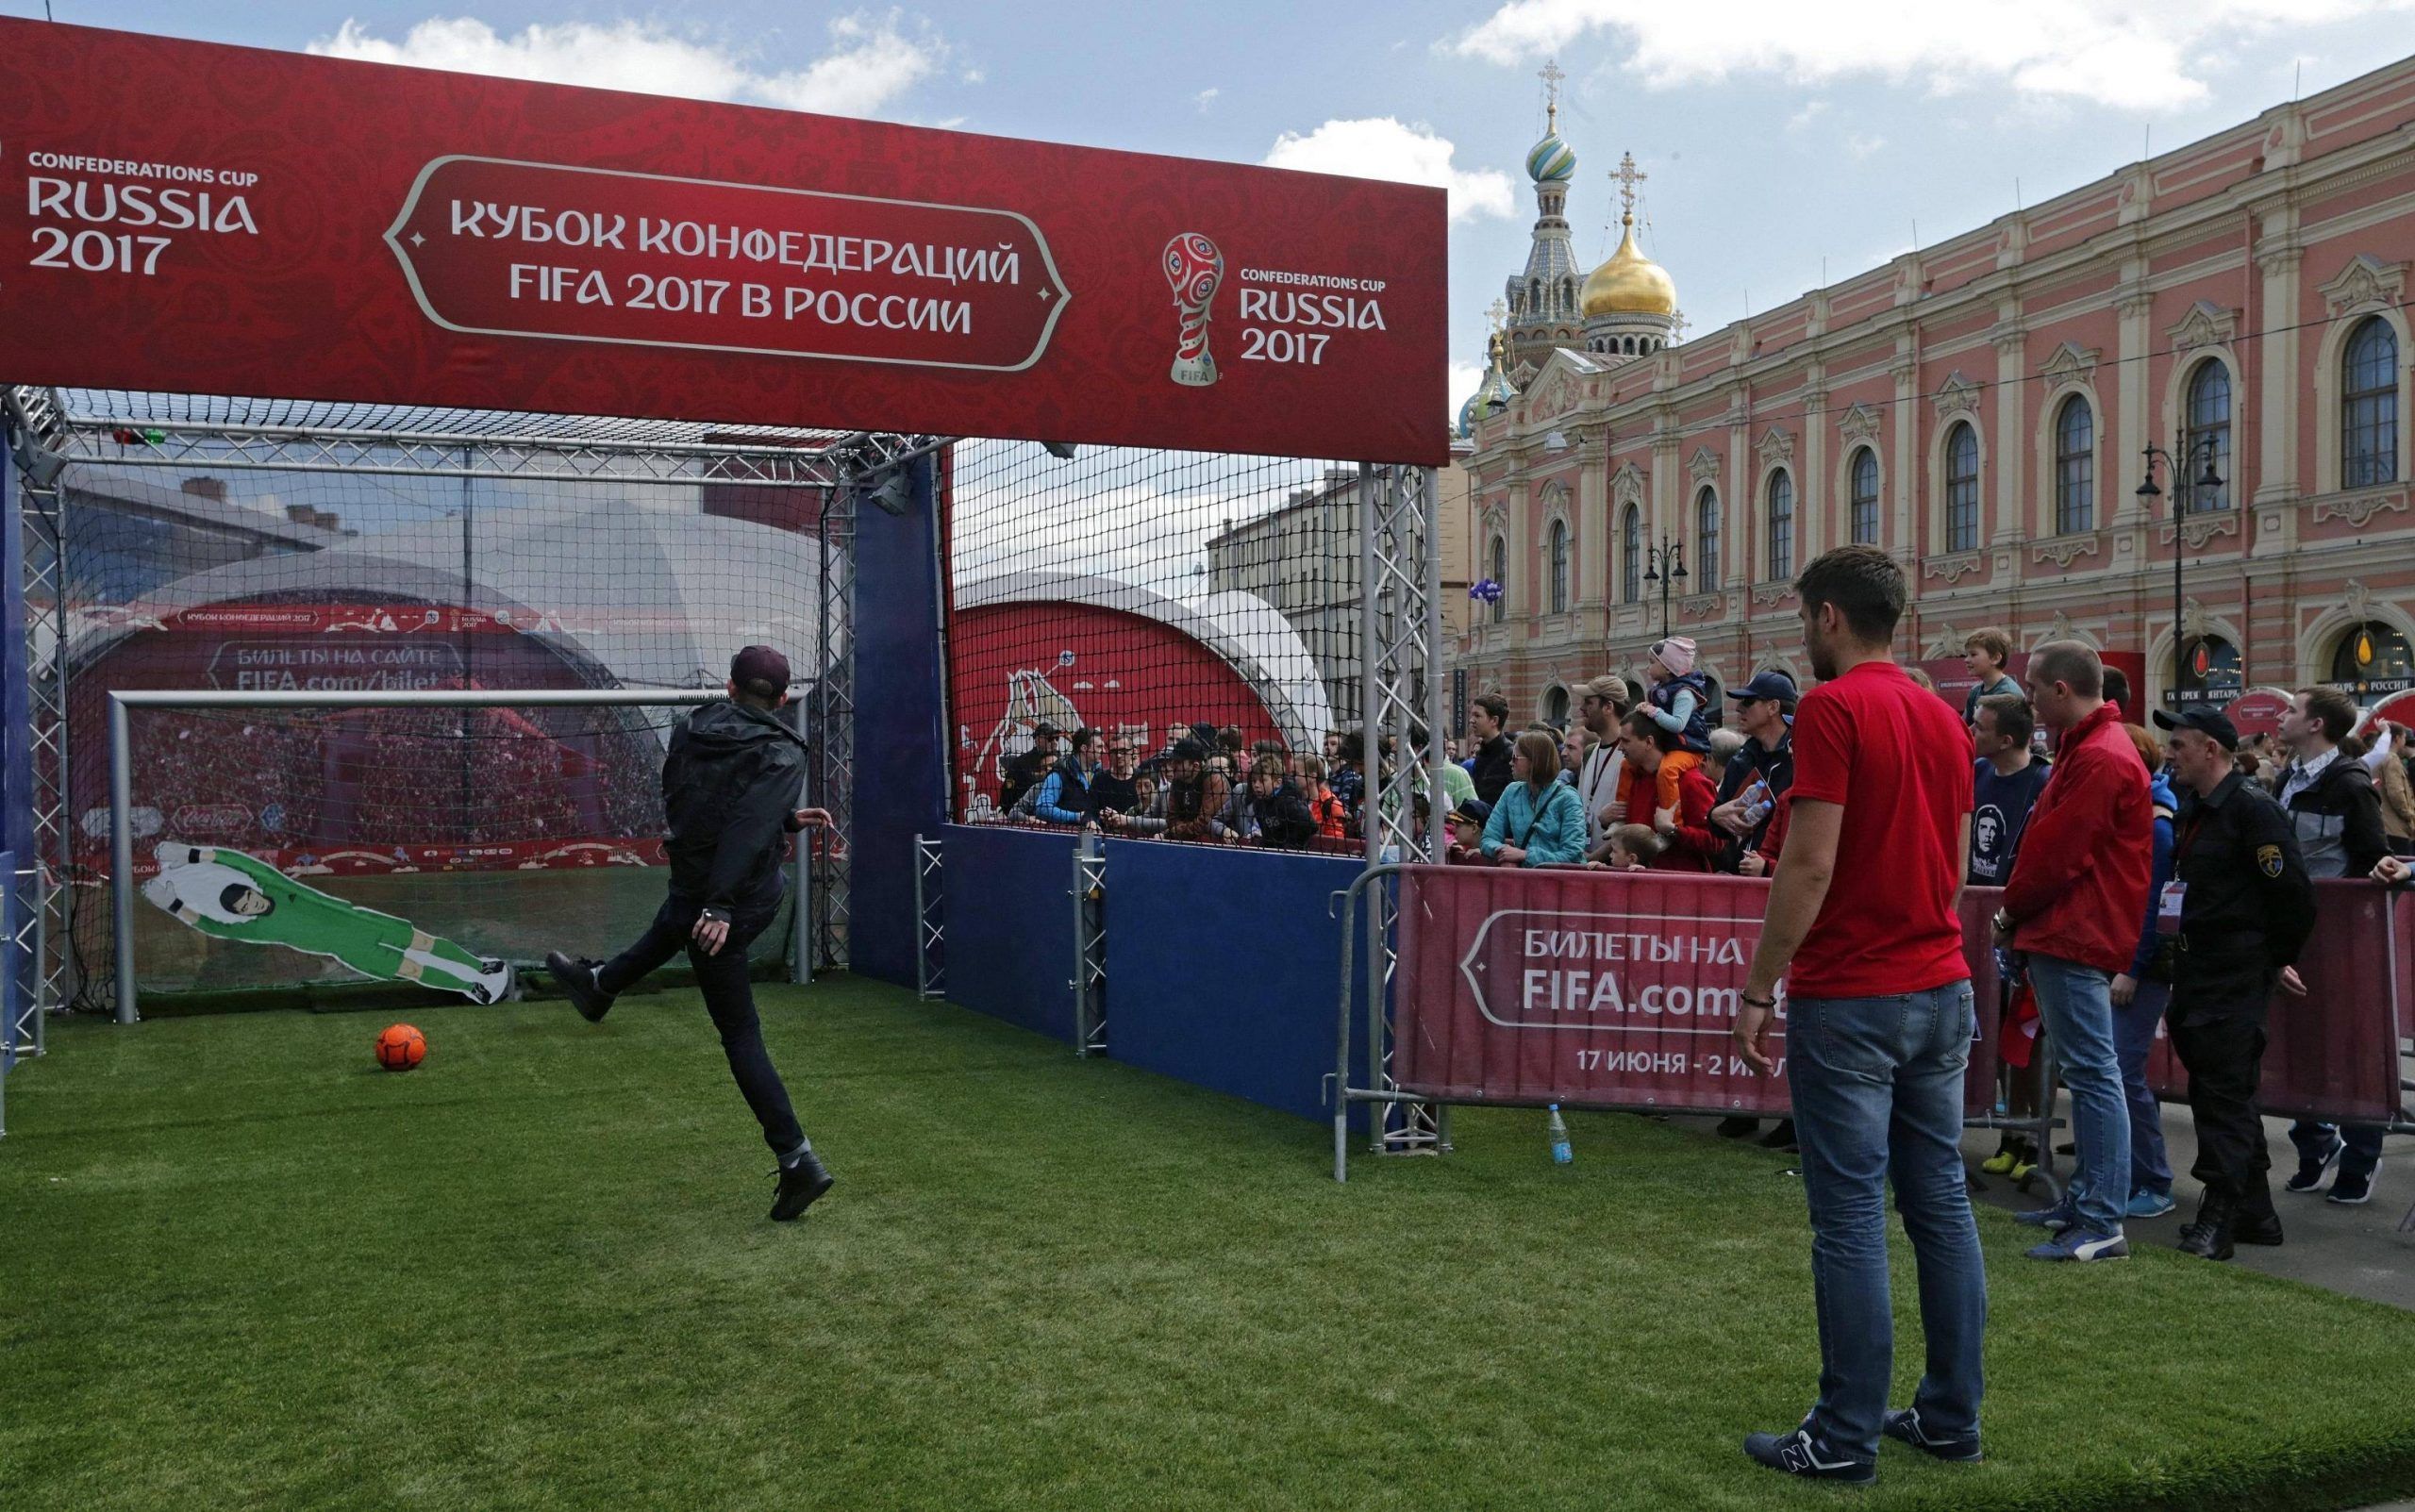 2017 FIFA Confederations Cup Park in St. Petersburg